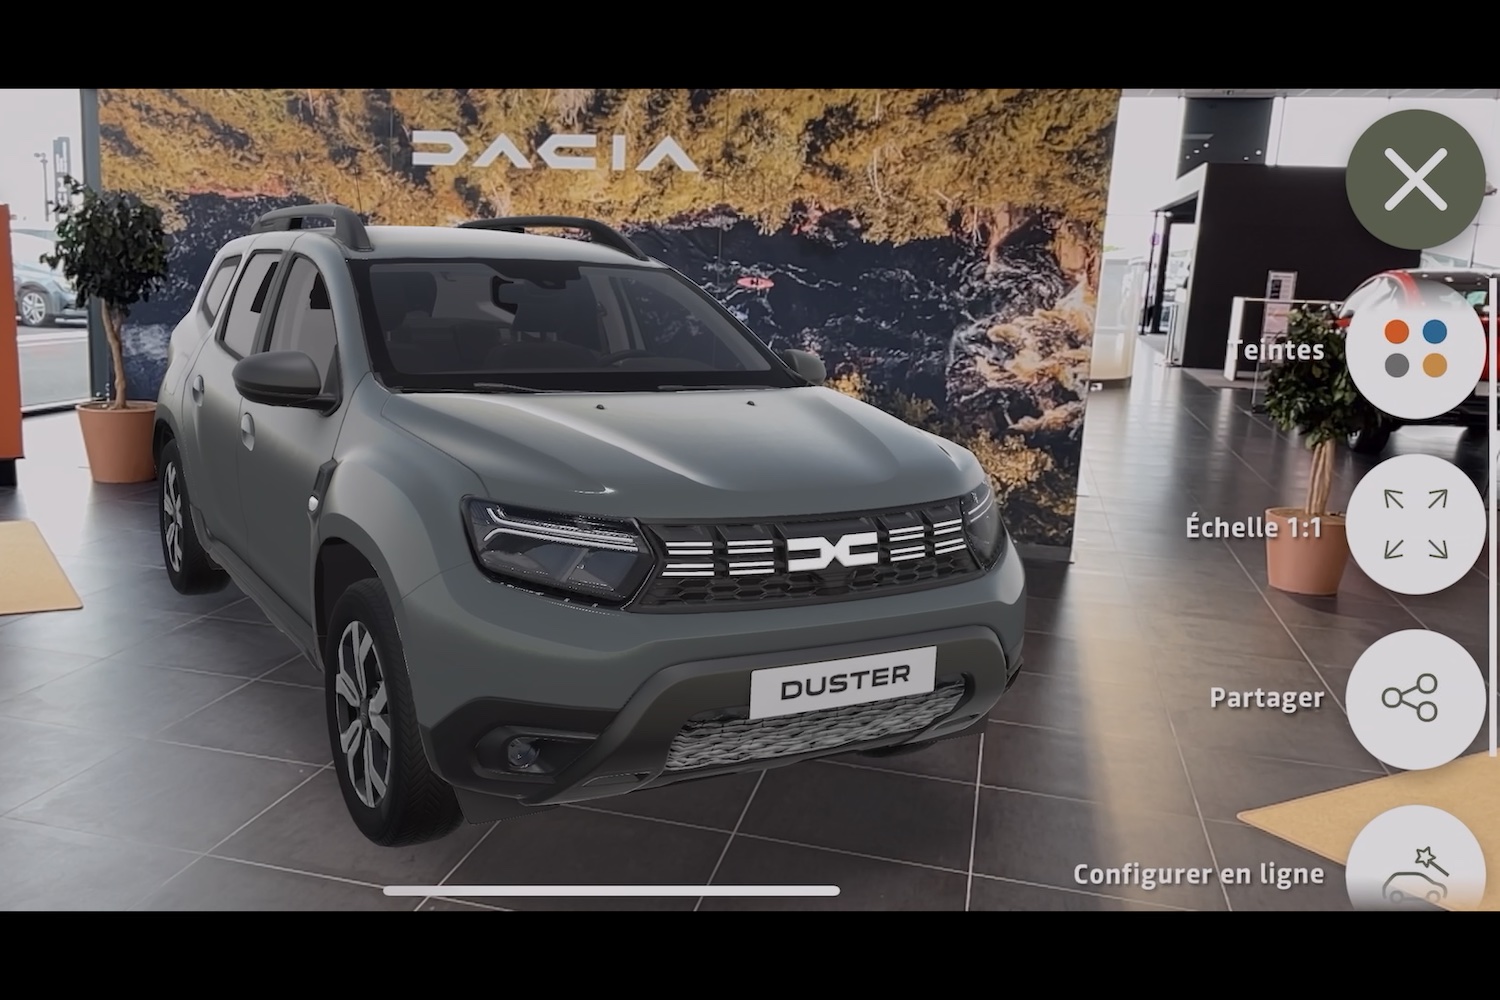 Dacia launches new augmented reality app